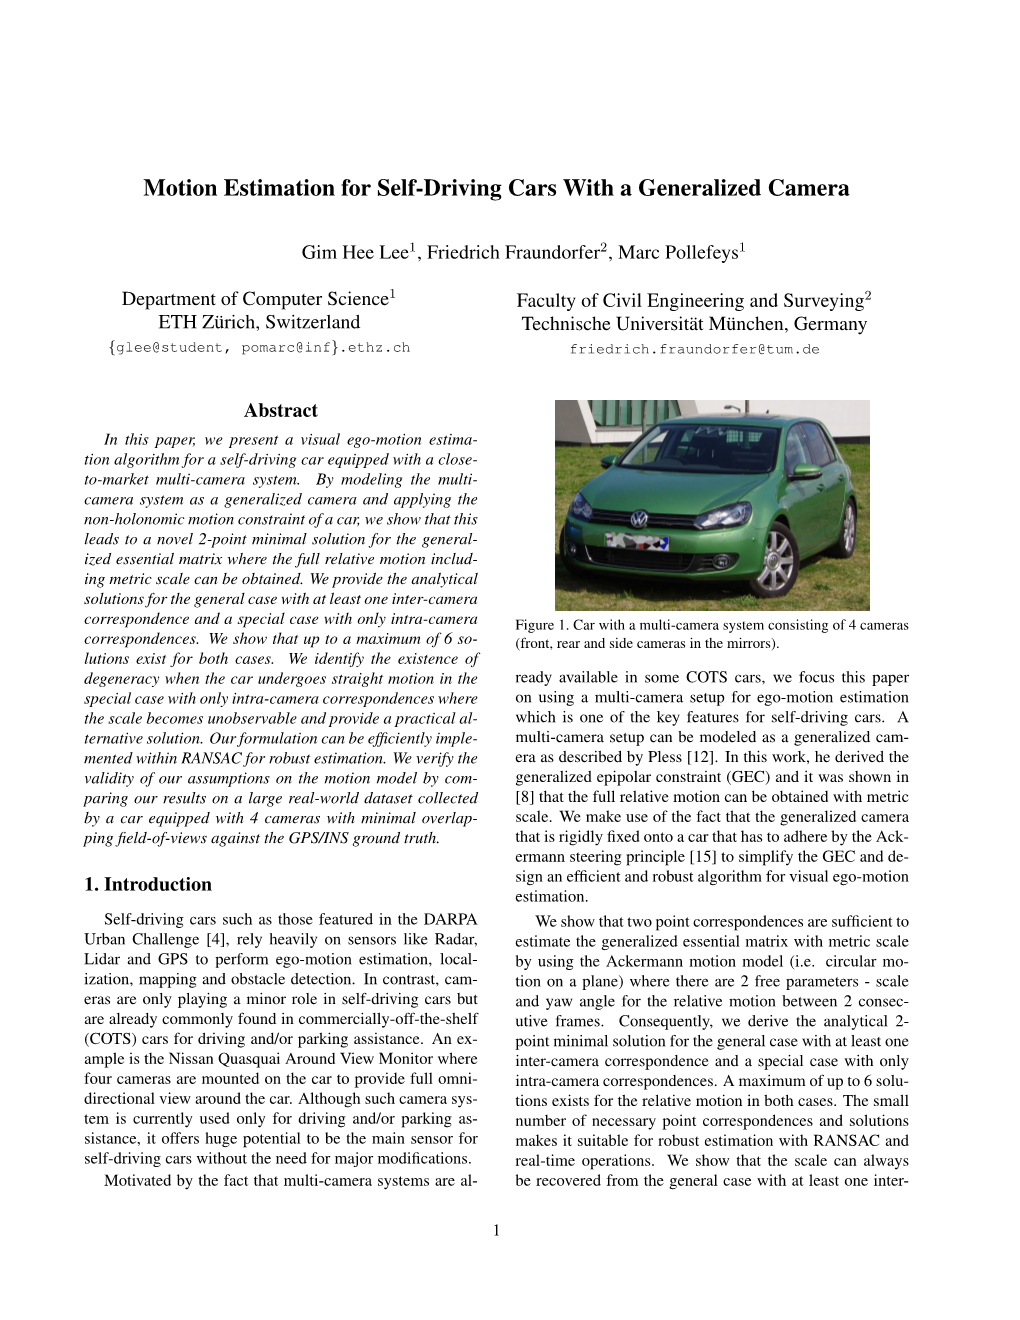 Motion Estimation for Self-Driving Cars with a Generalized Camera